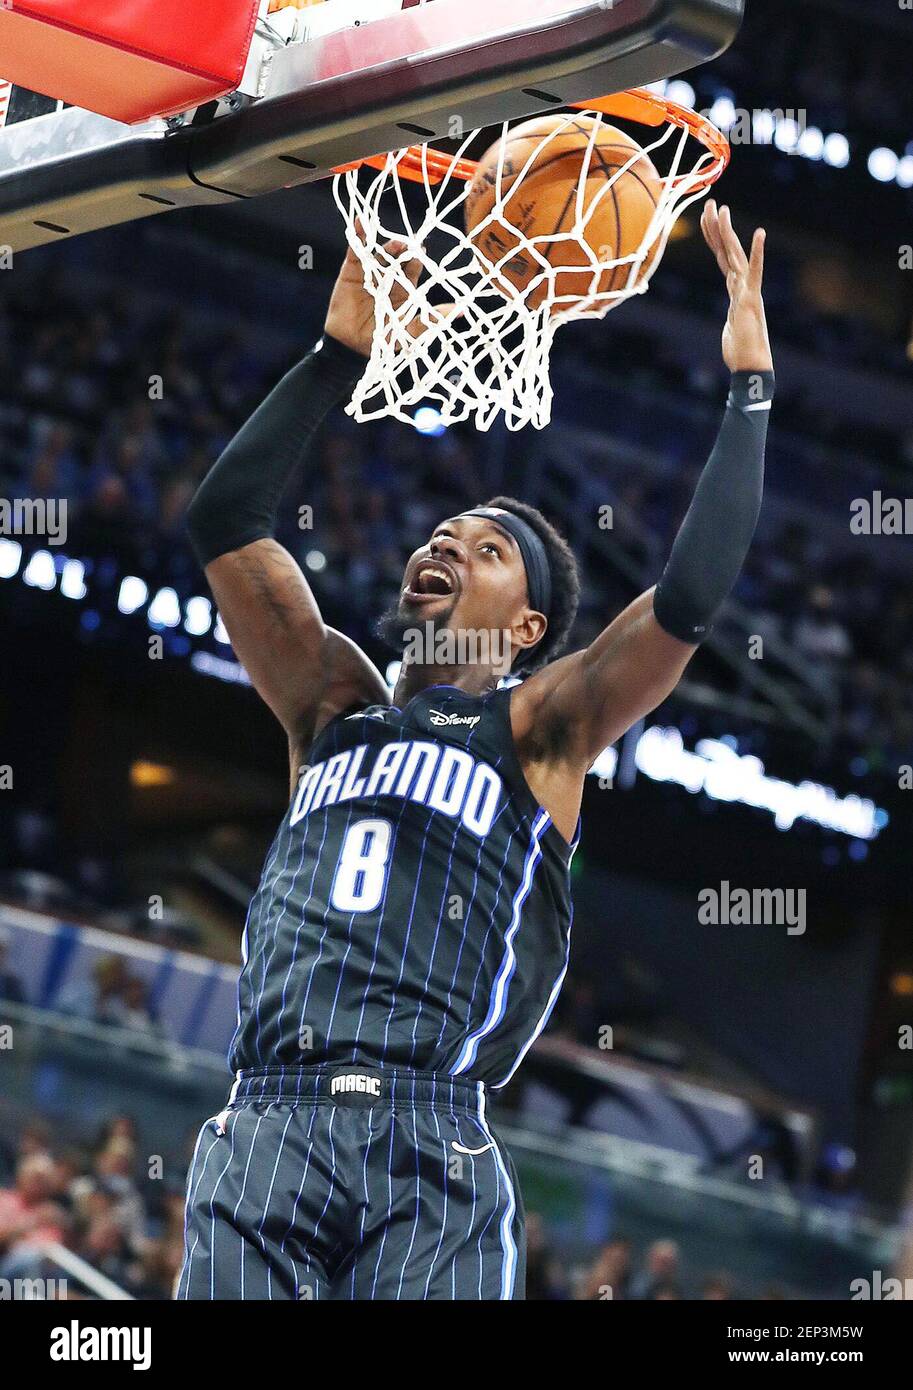 The Orlando Magic's Terrence Ross dunks against the Toronto